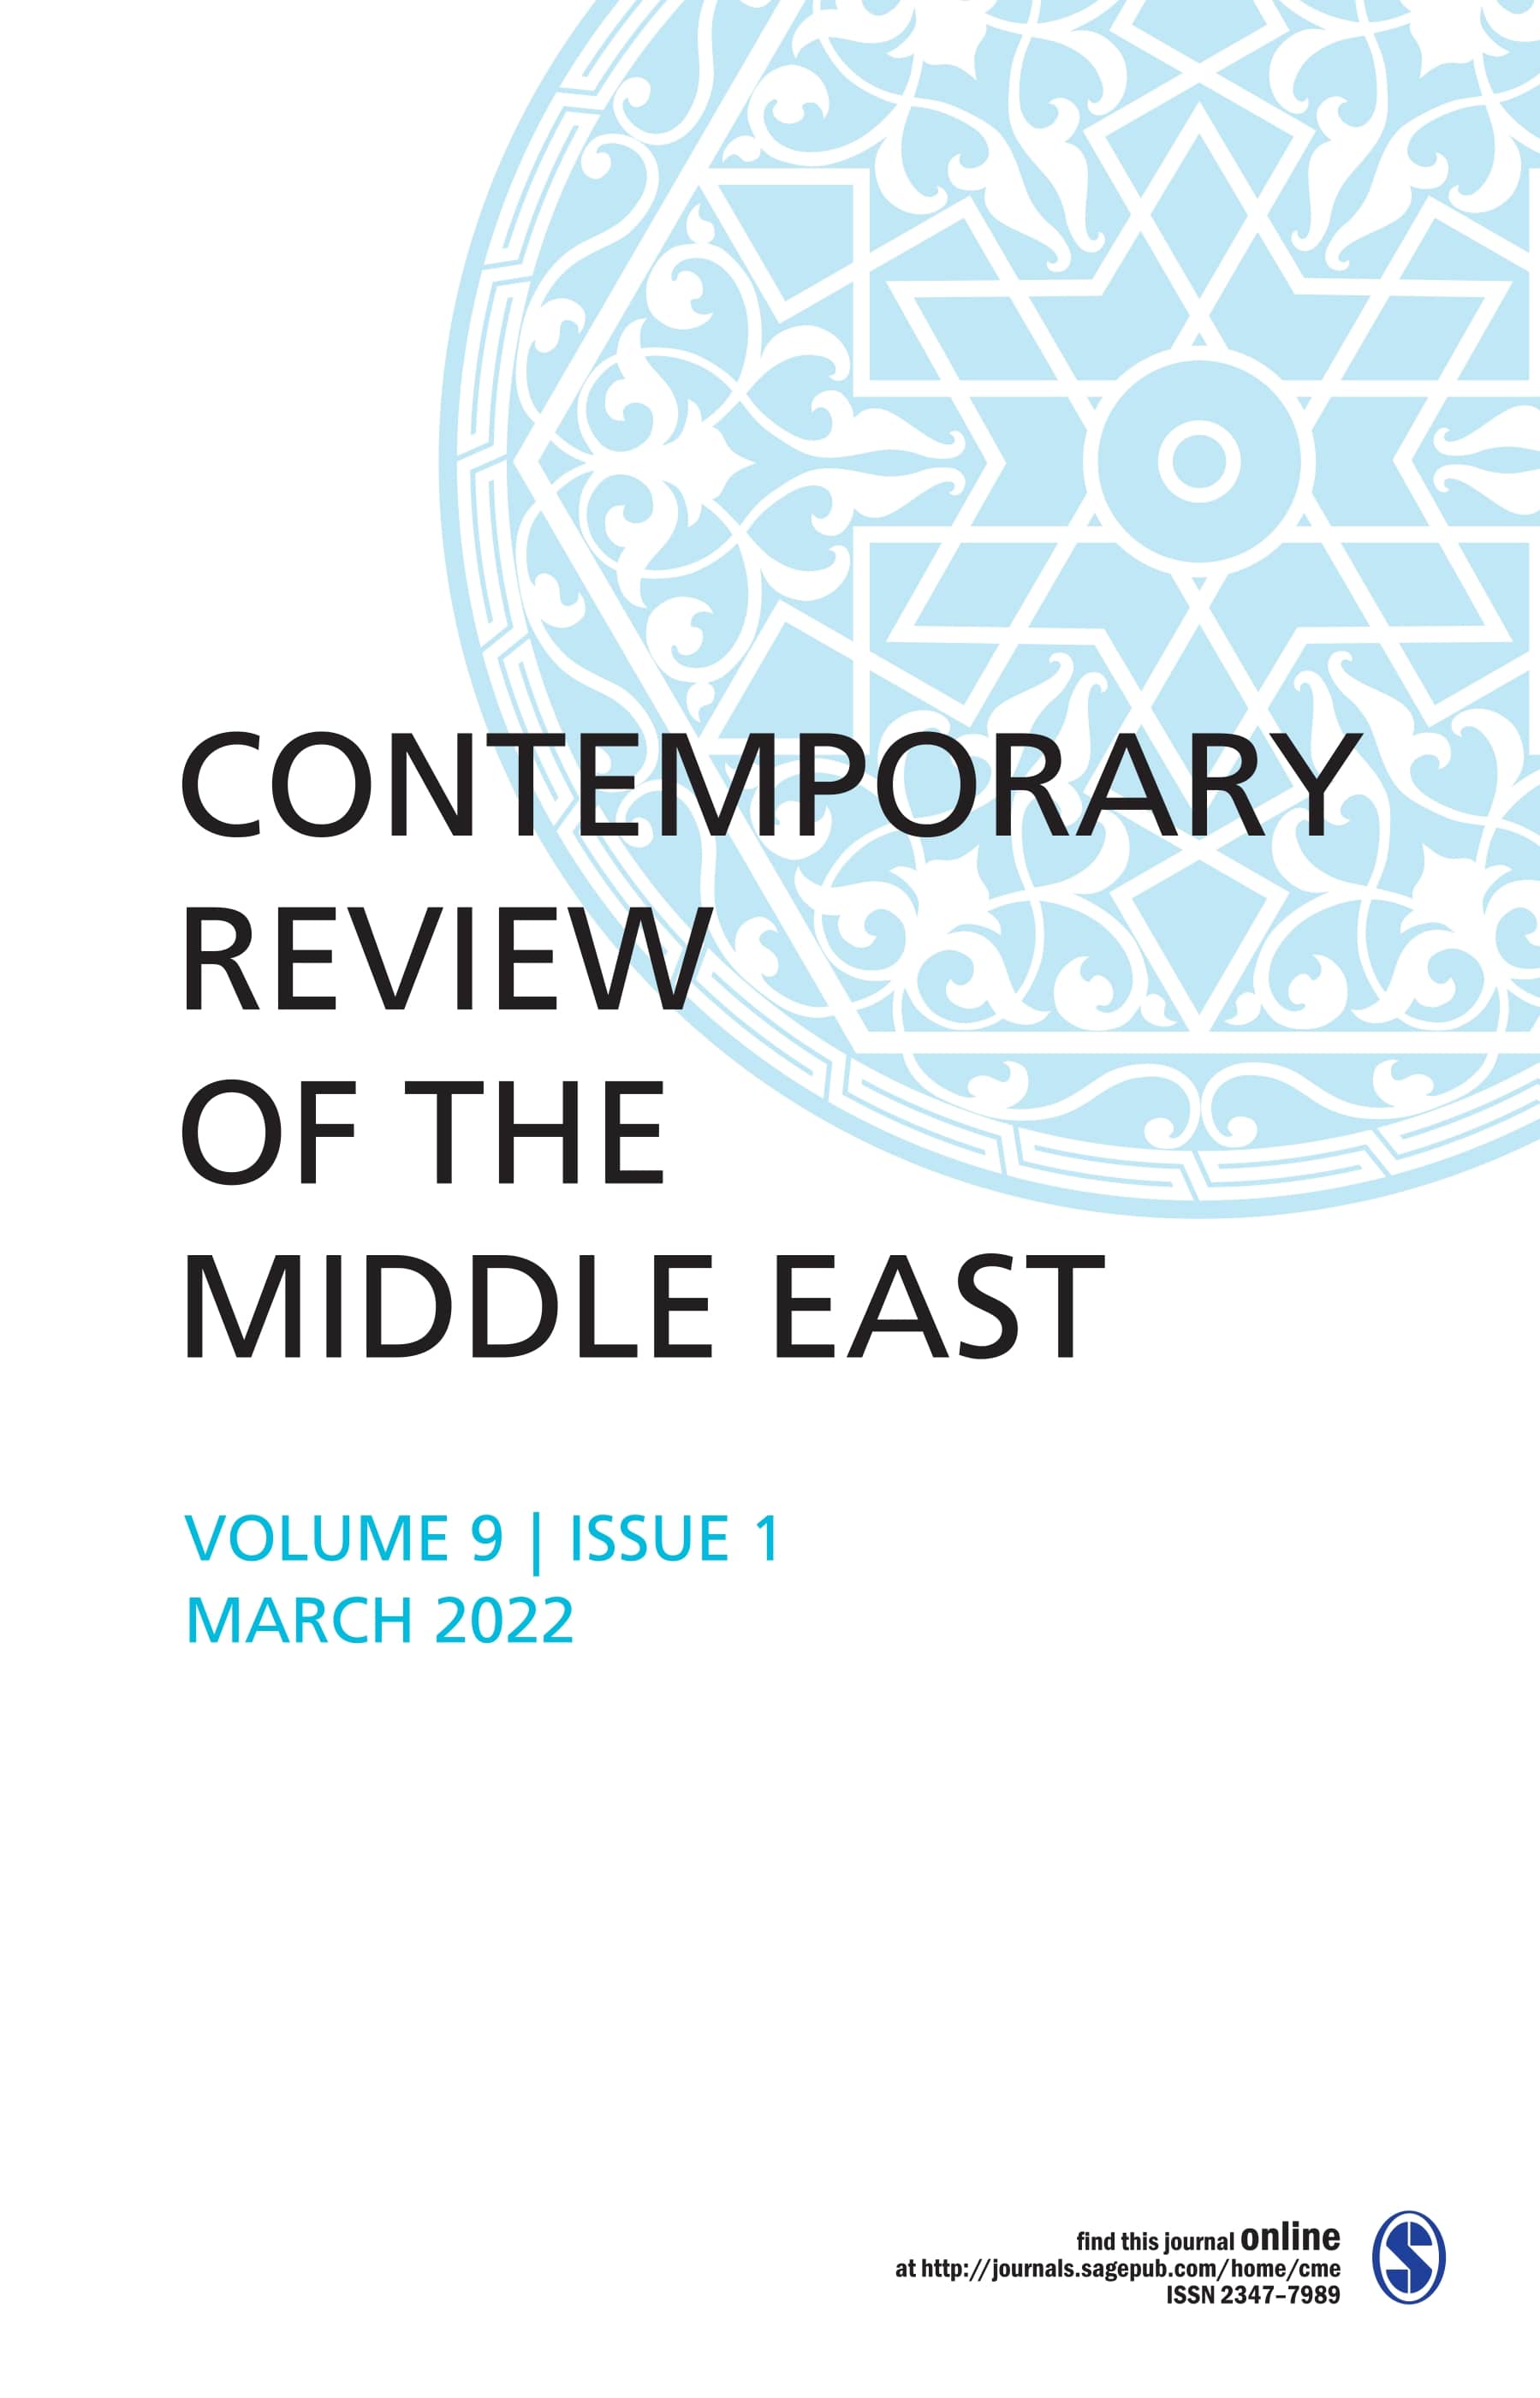 Contemporary Review of the Middle East Volume 9 Issue 1, March 2022: Book Reviews